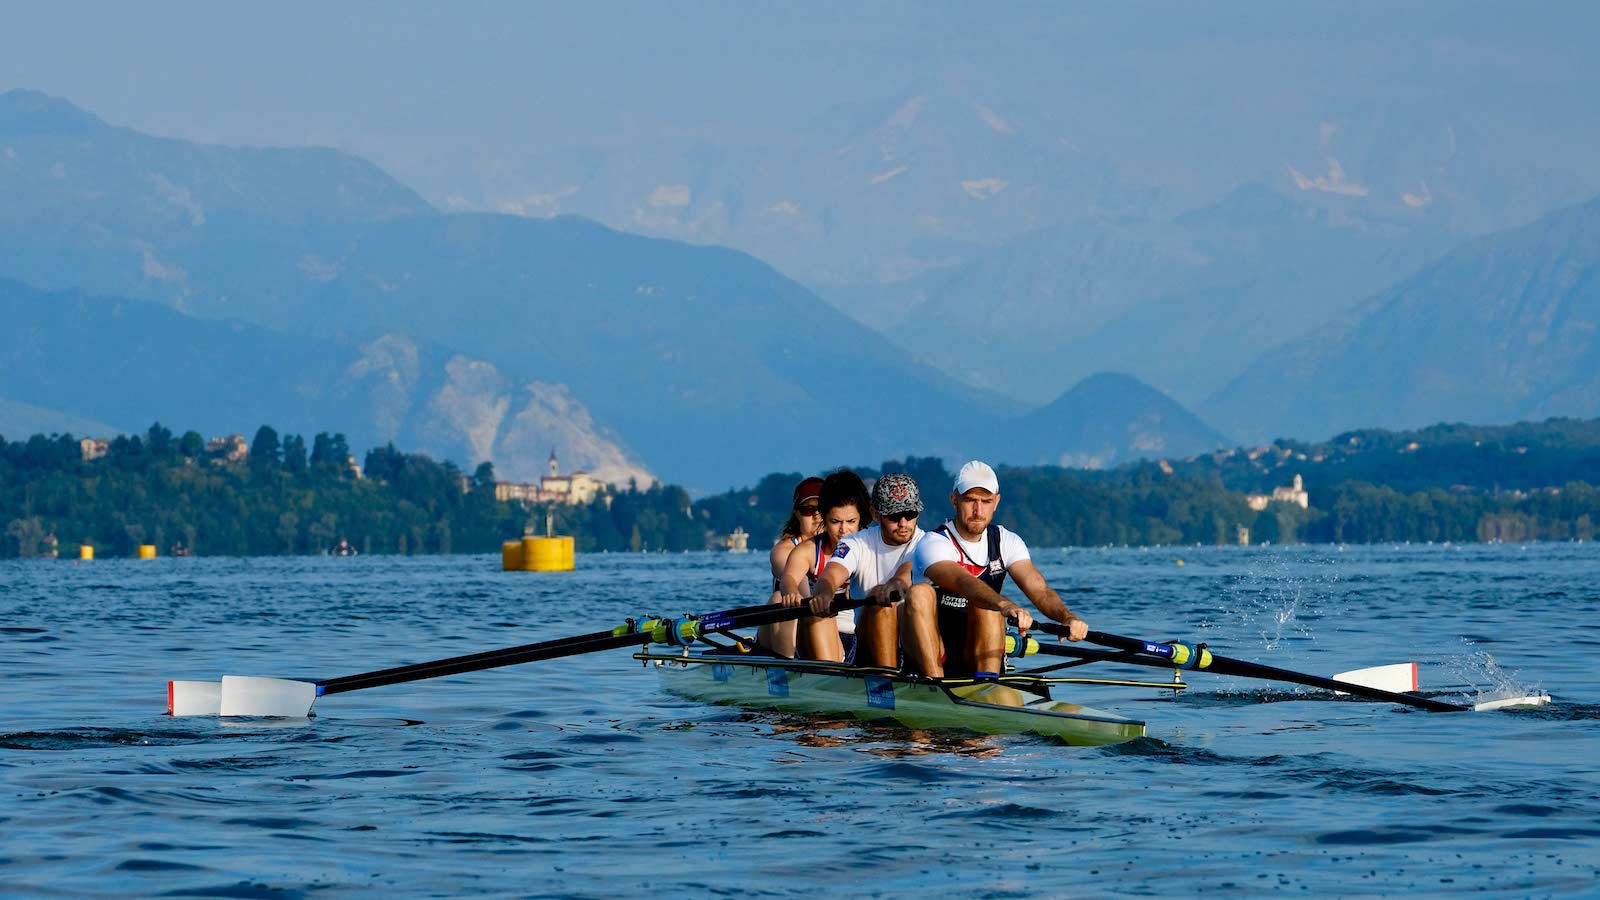 European rowing qualifier for Tokyo 2020 confirmed to take place in Varese in April